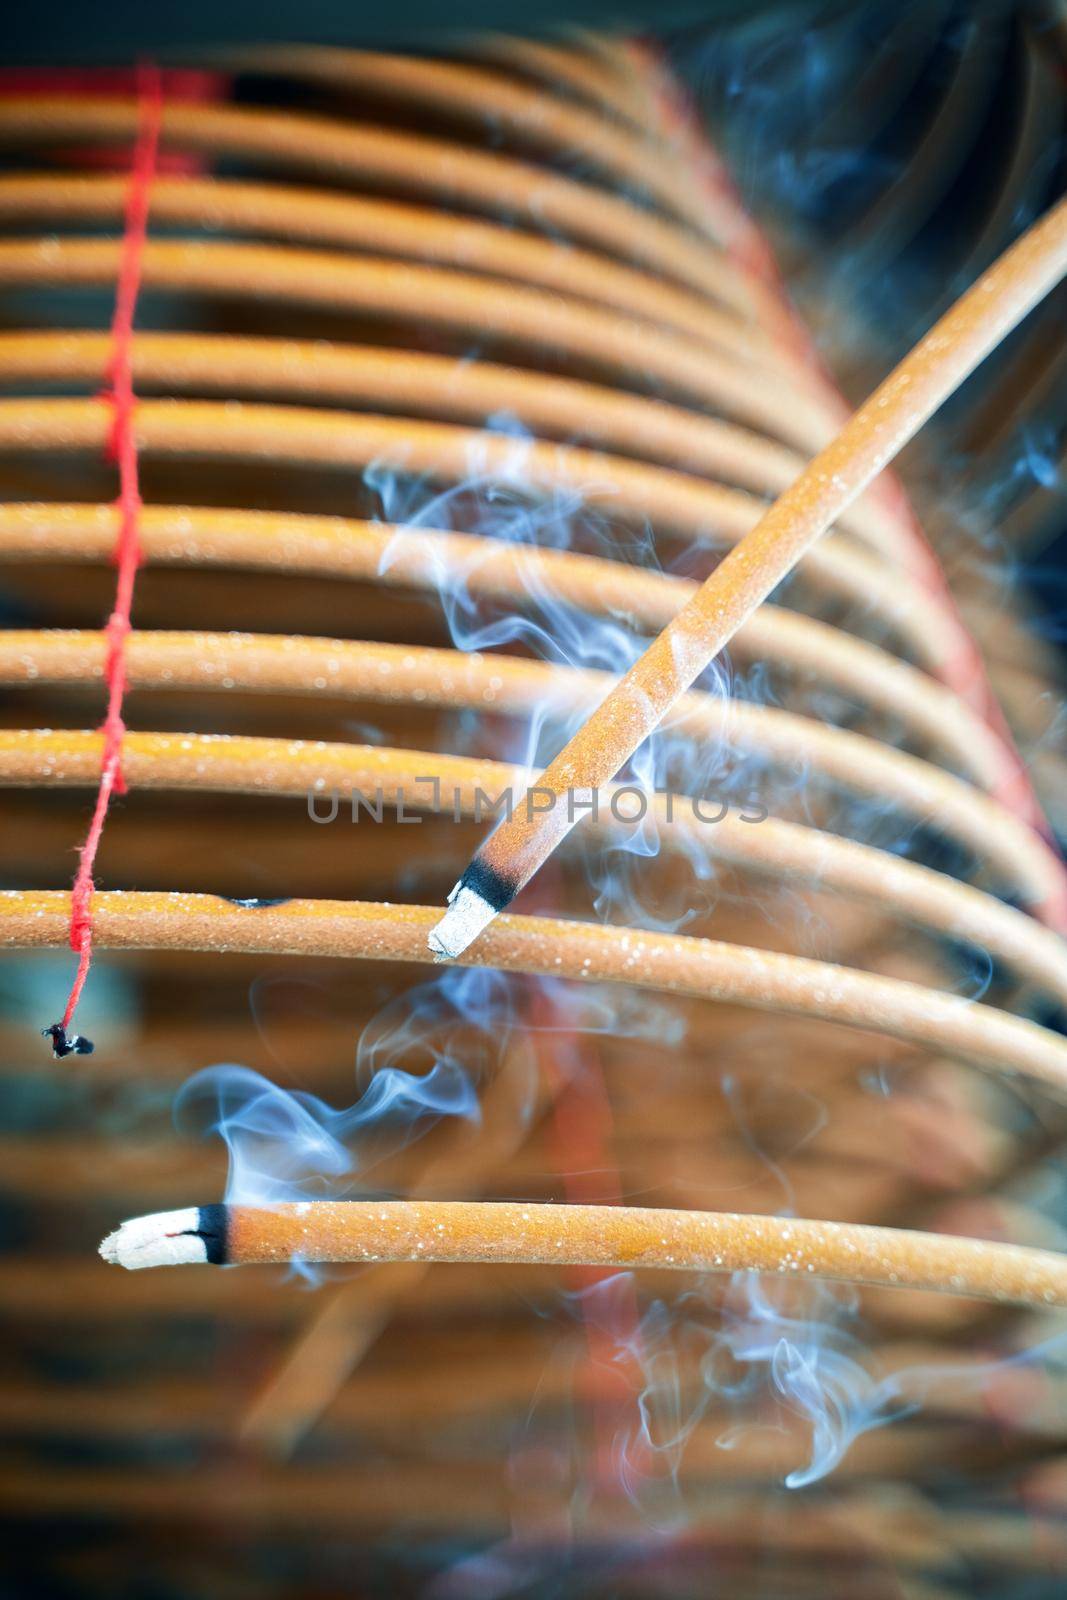 Burned coil swirl incense in Macau (Macao) temple, traditional Chinese cultural customs to worship god, close up, lifestyle. by ROMIXIMAGE